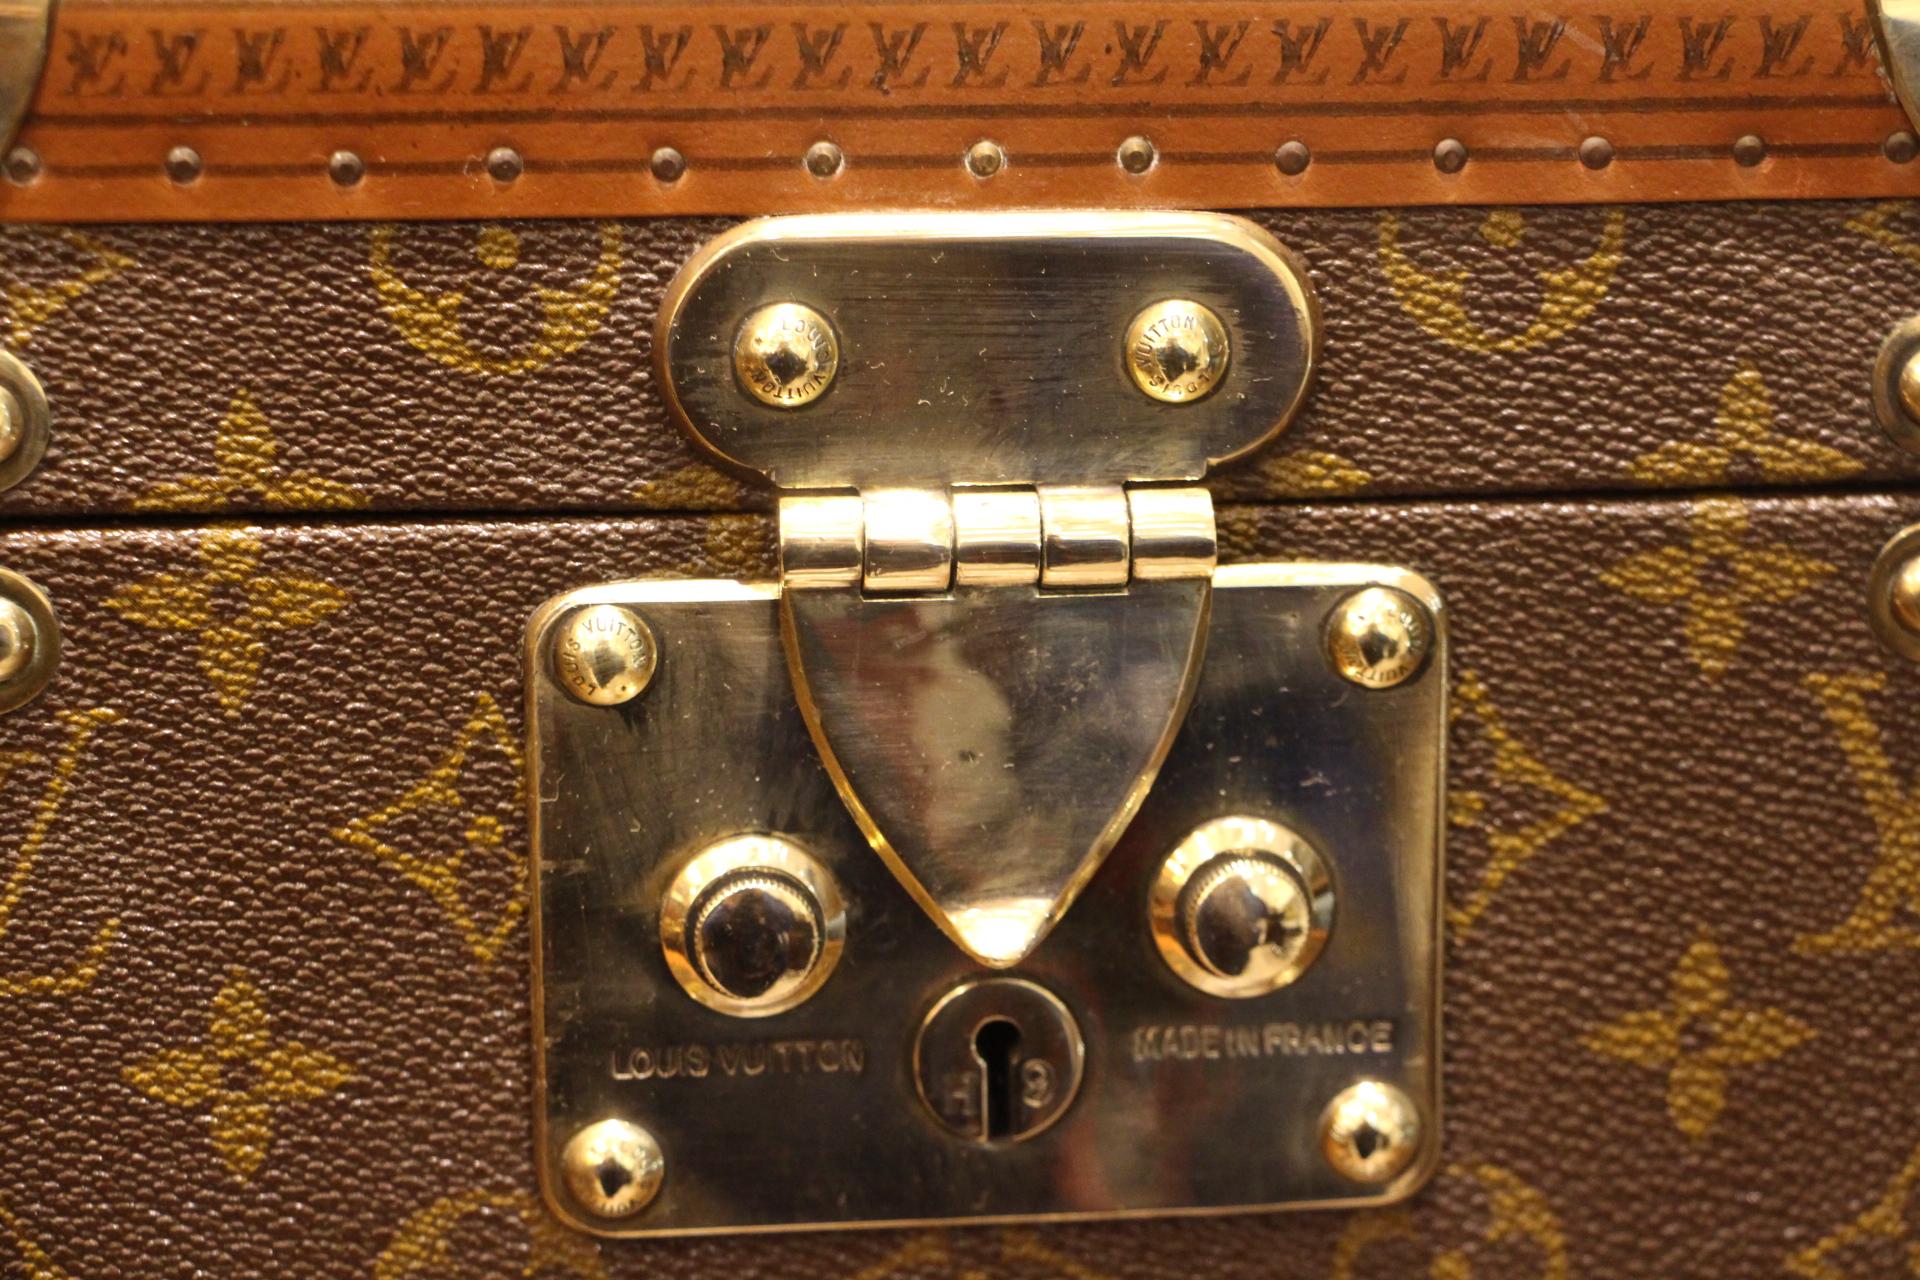 Very nice Louis Vuitton monogram train case with solid brass corners and lock.

Leather top handle.

All its studs are engraved Louis Vuitton. 

Its interior is in very good condition, fitted with leather strap. Louis Vuitton serial number